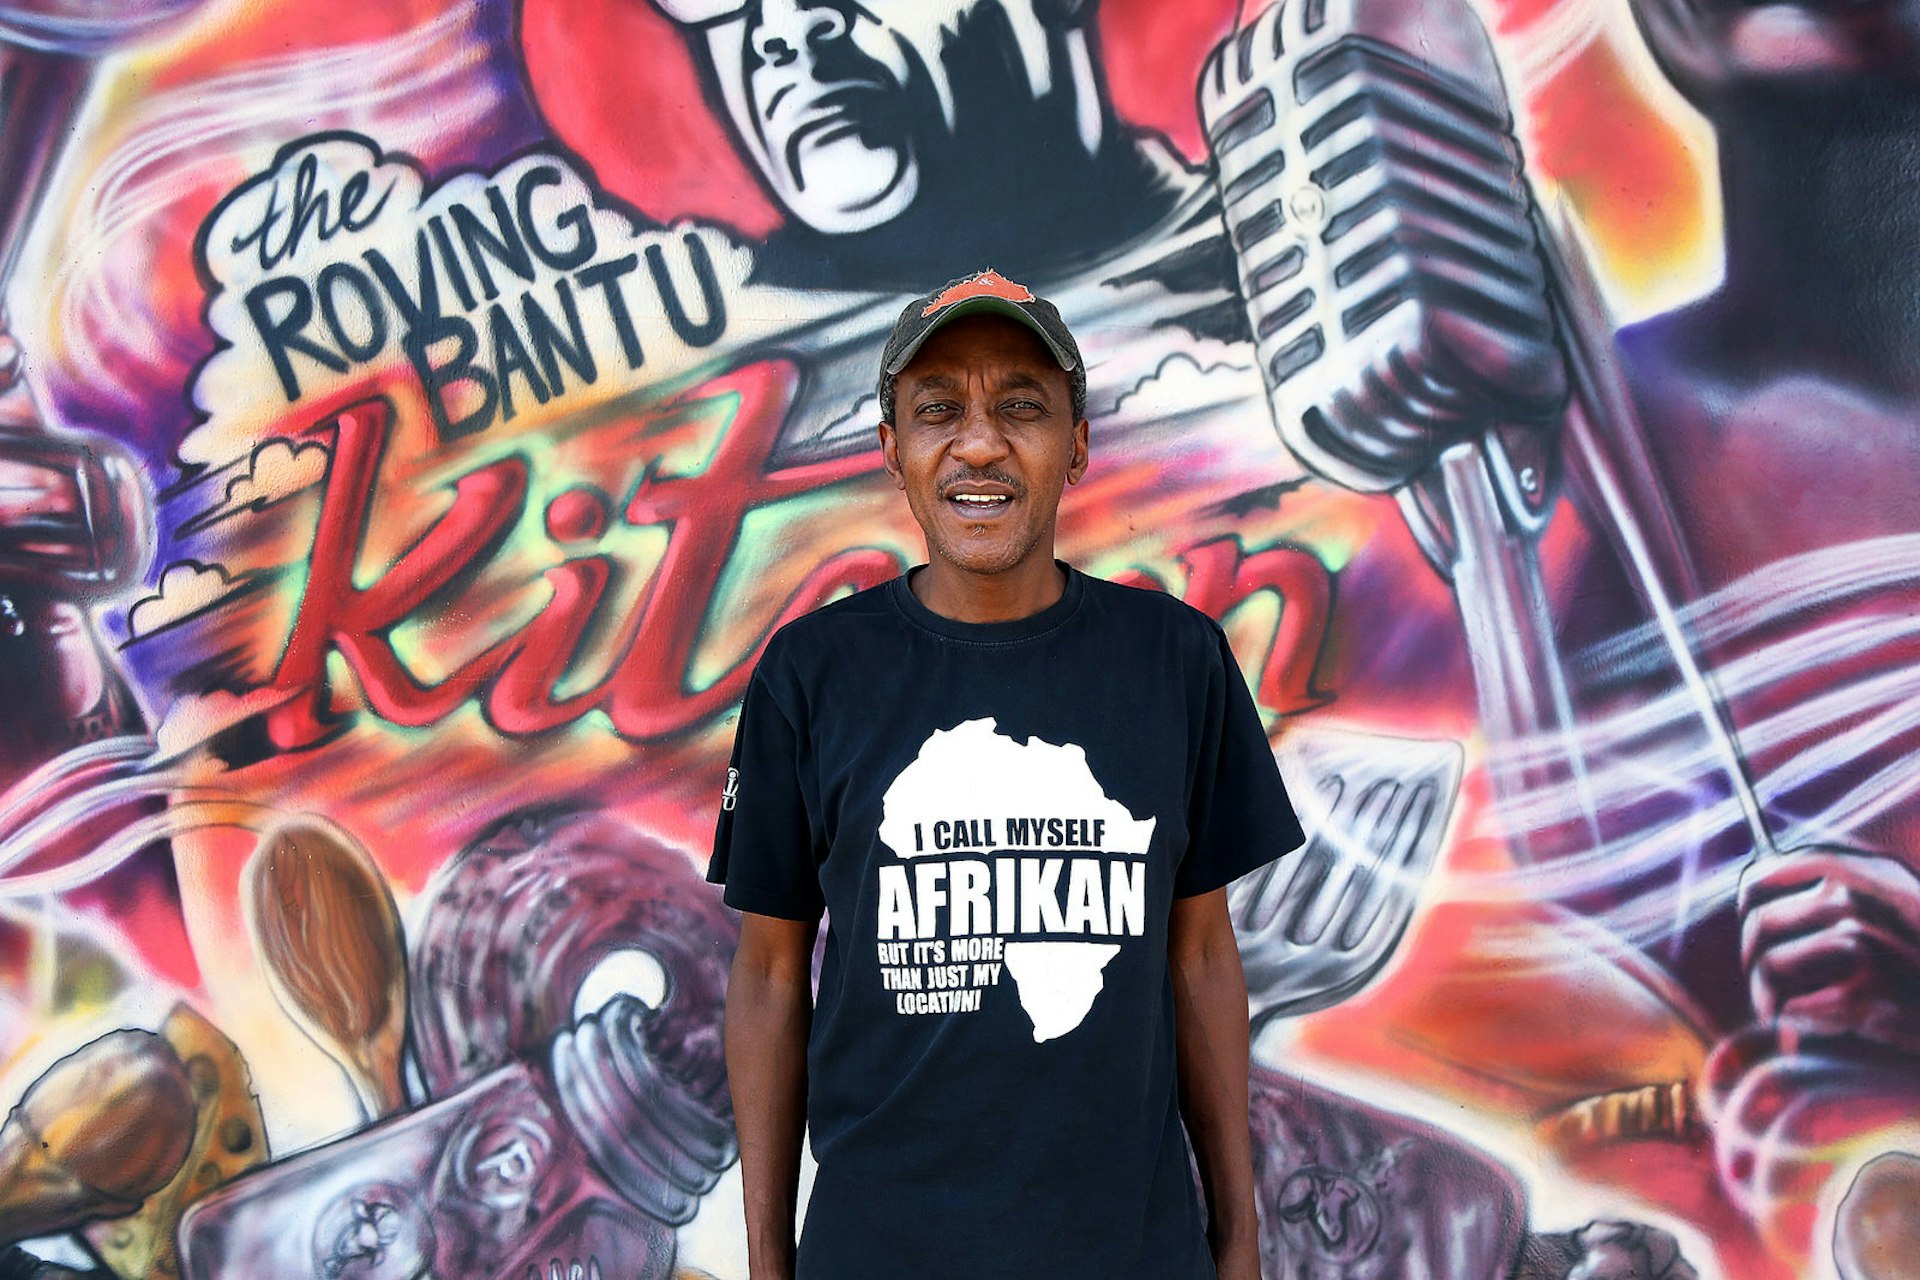 Sifiso Ntuli, stands in front of his restaurant which is covered in a street art mural. He wears a T-shirt that says, 'I all myself Afrikan, but it's more than just my location!' © Heather Mason / Lonely Planet